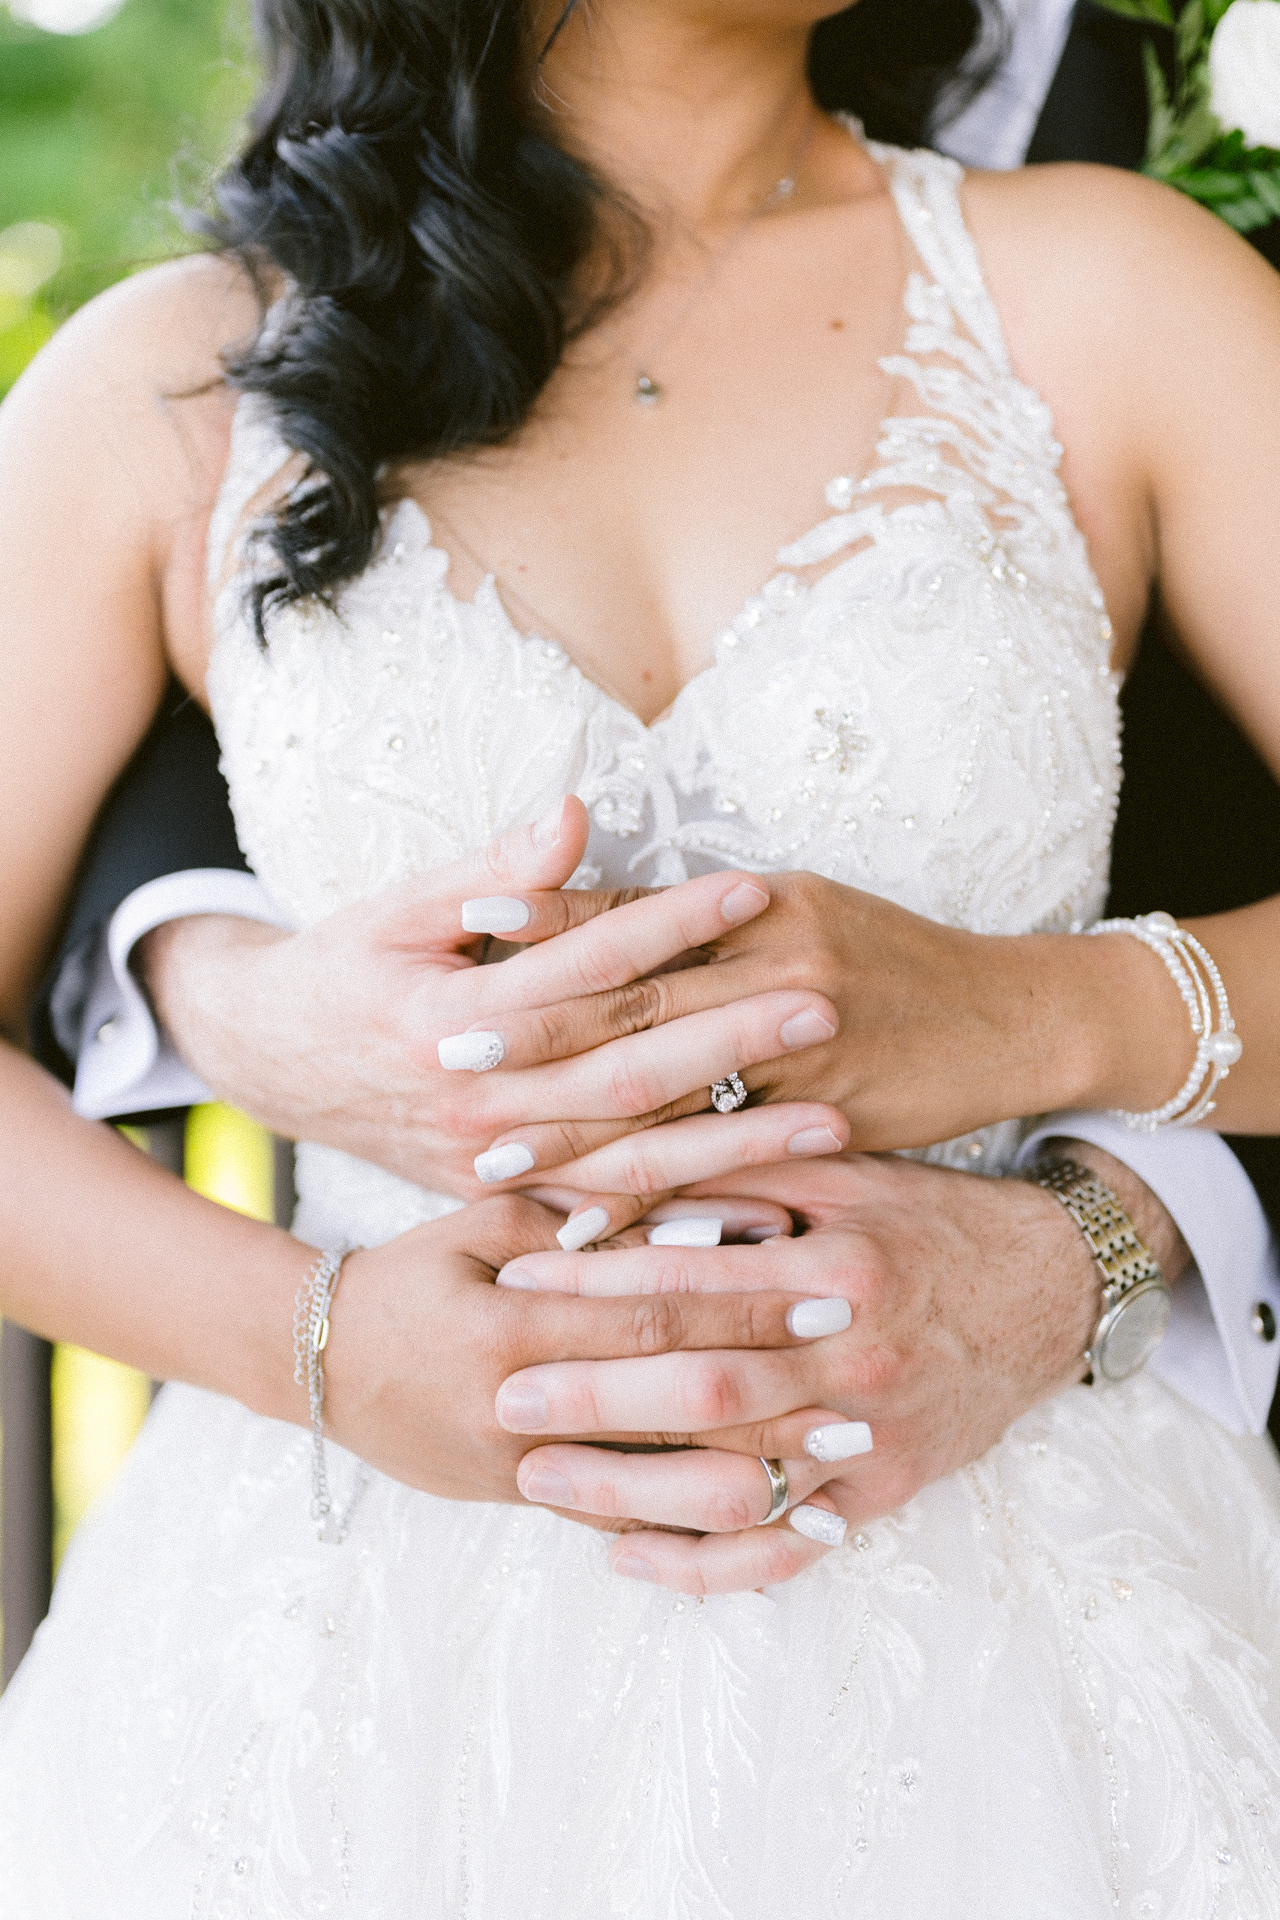 A close-up of a bride and groom hands clasped together, showcasing wedding attire and rings.